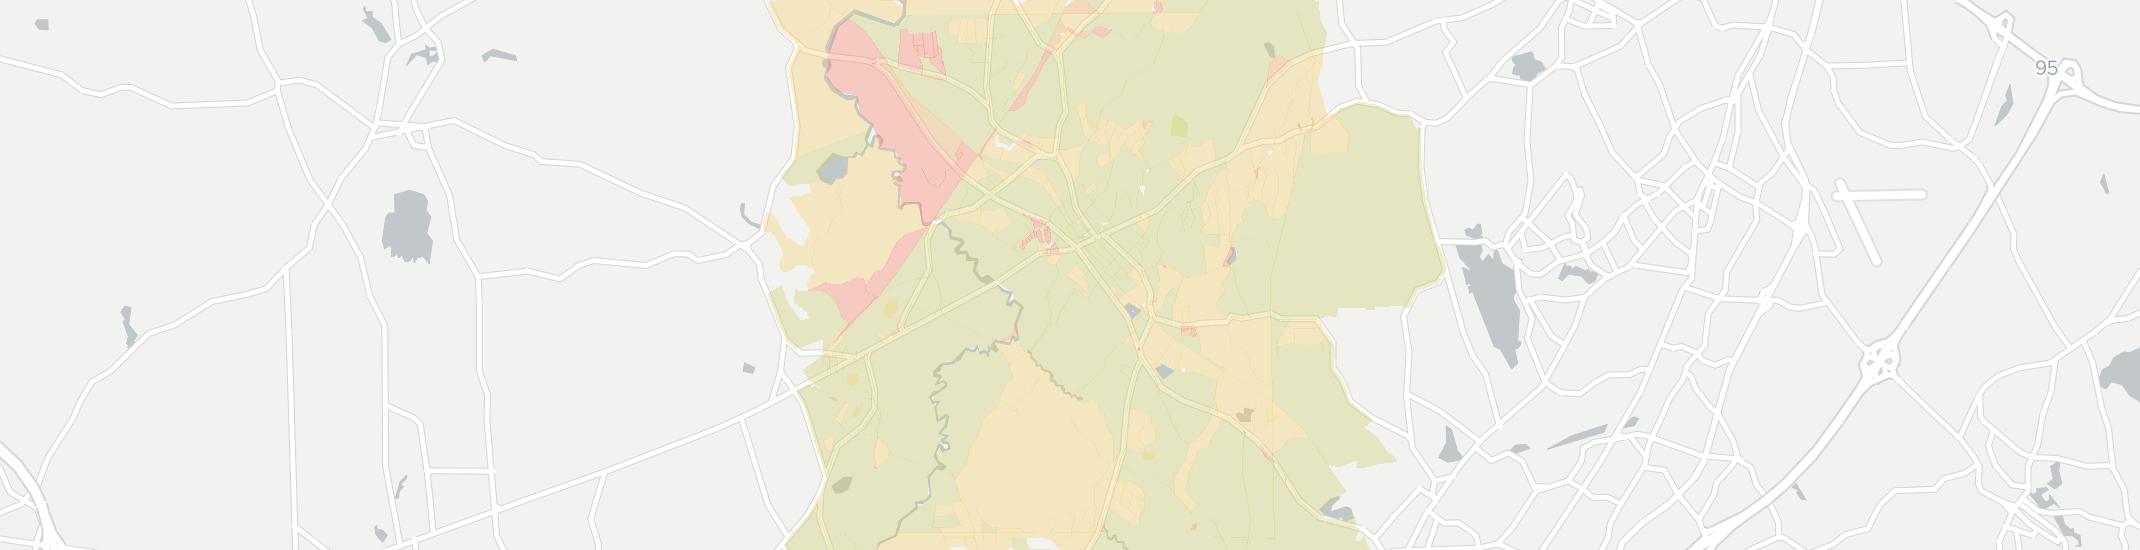 Medfield Internet Competition Map. Click for interactive map.